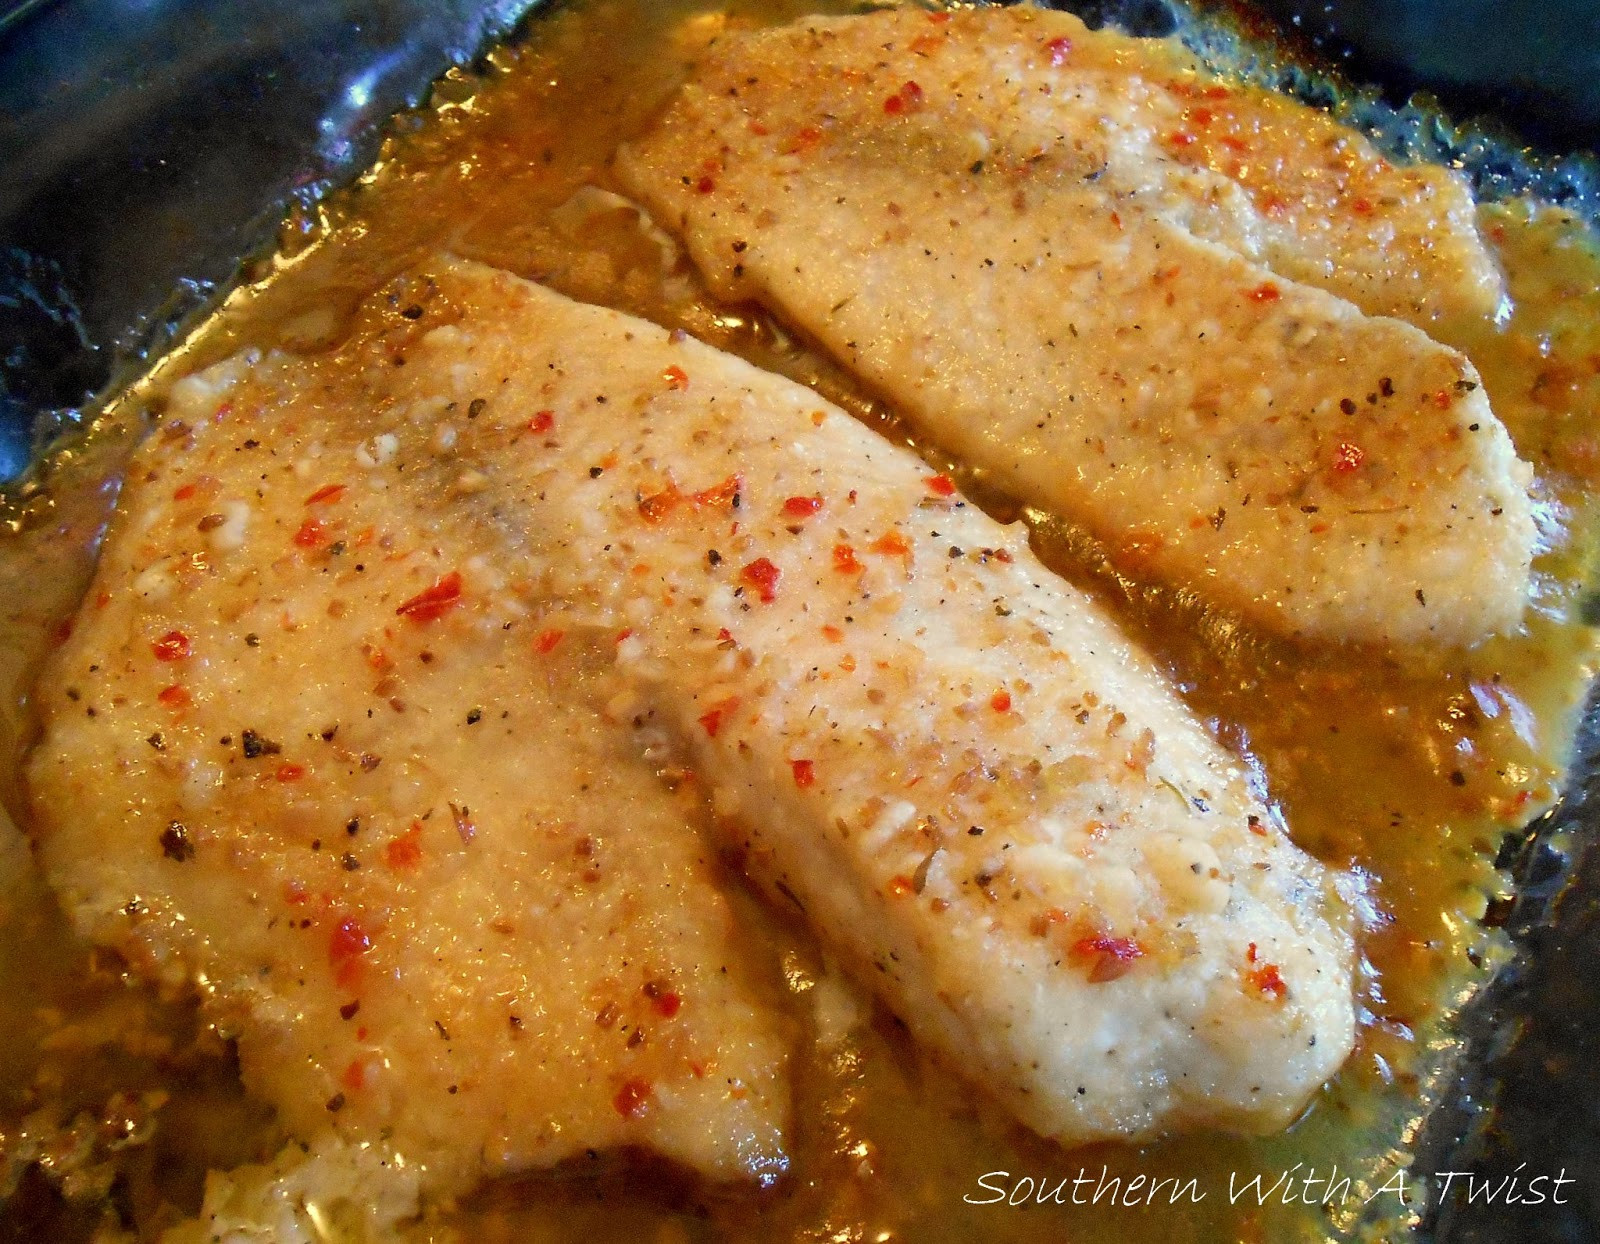 Recipes For Baked Fish Fillets
 Southern With A Twist Baked Fish